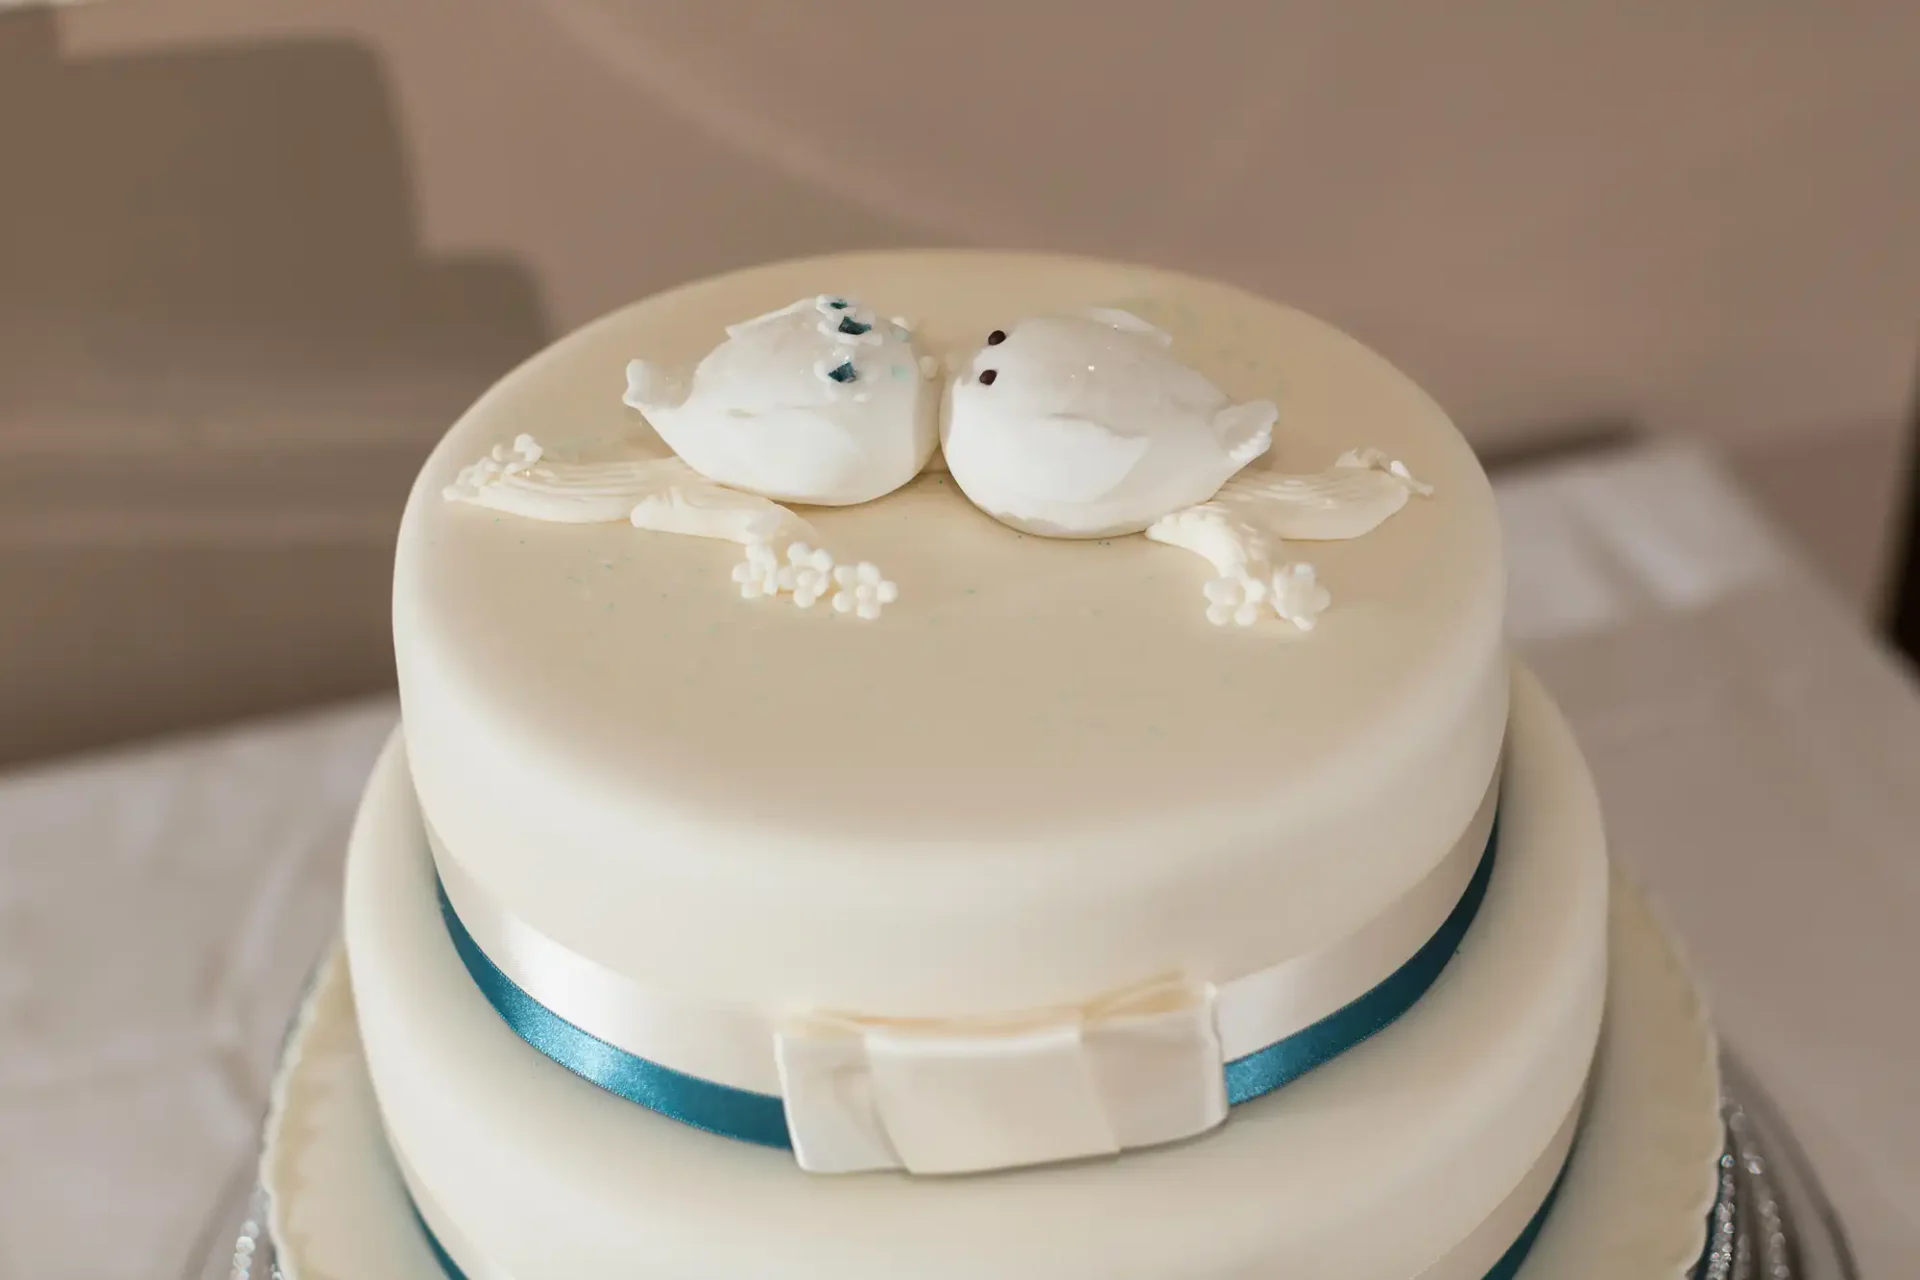 A wedding cake with a white fondant icing, adorned with a blue ribbon, a white bow, and two decorative birds on top.